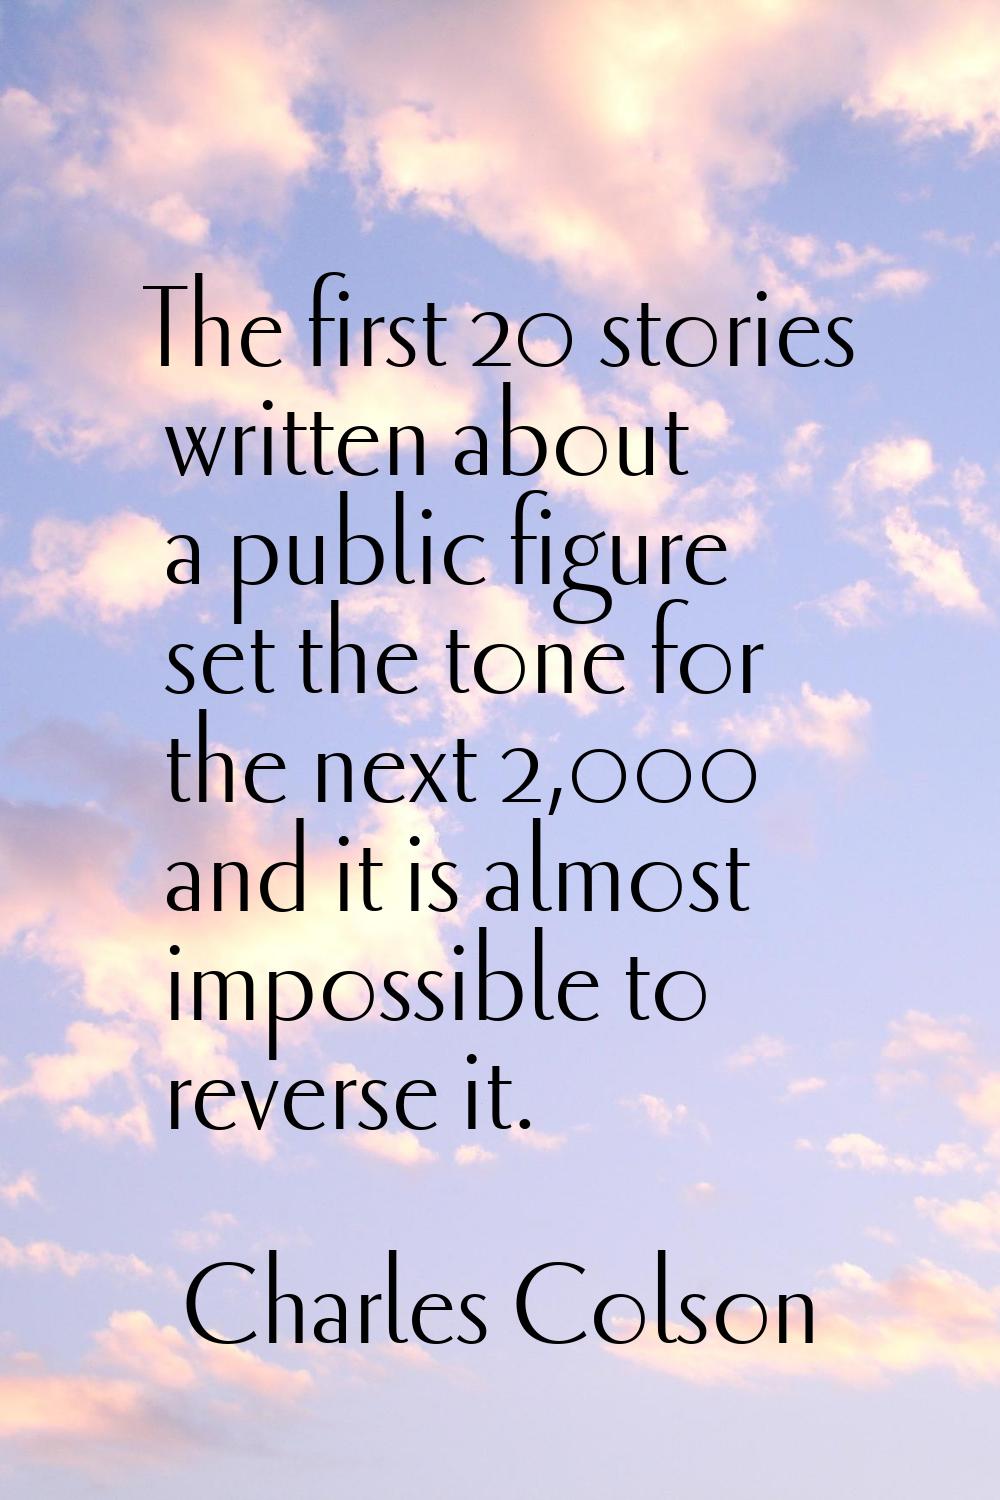 The first 20 stories written about a public figure set the tone for the next 2,000 and it is almost